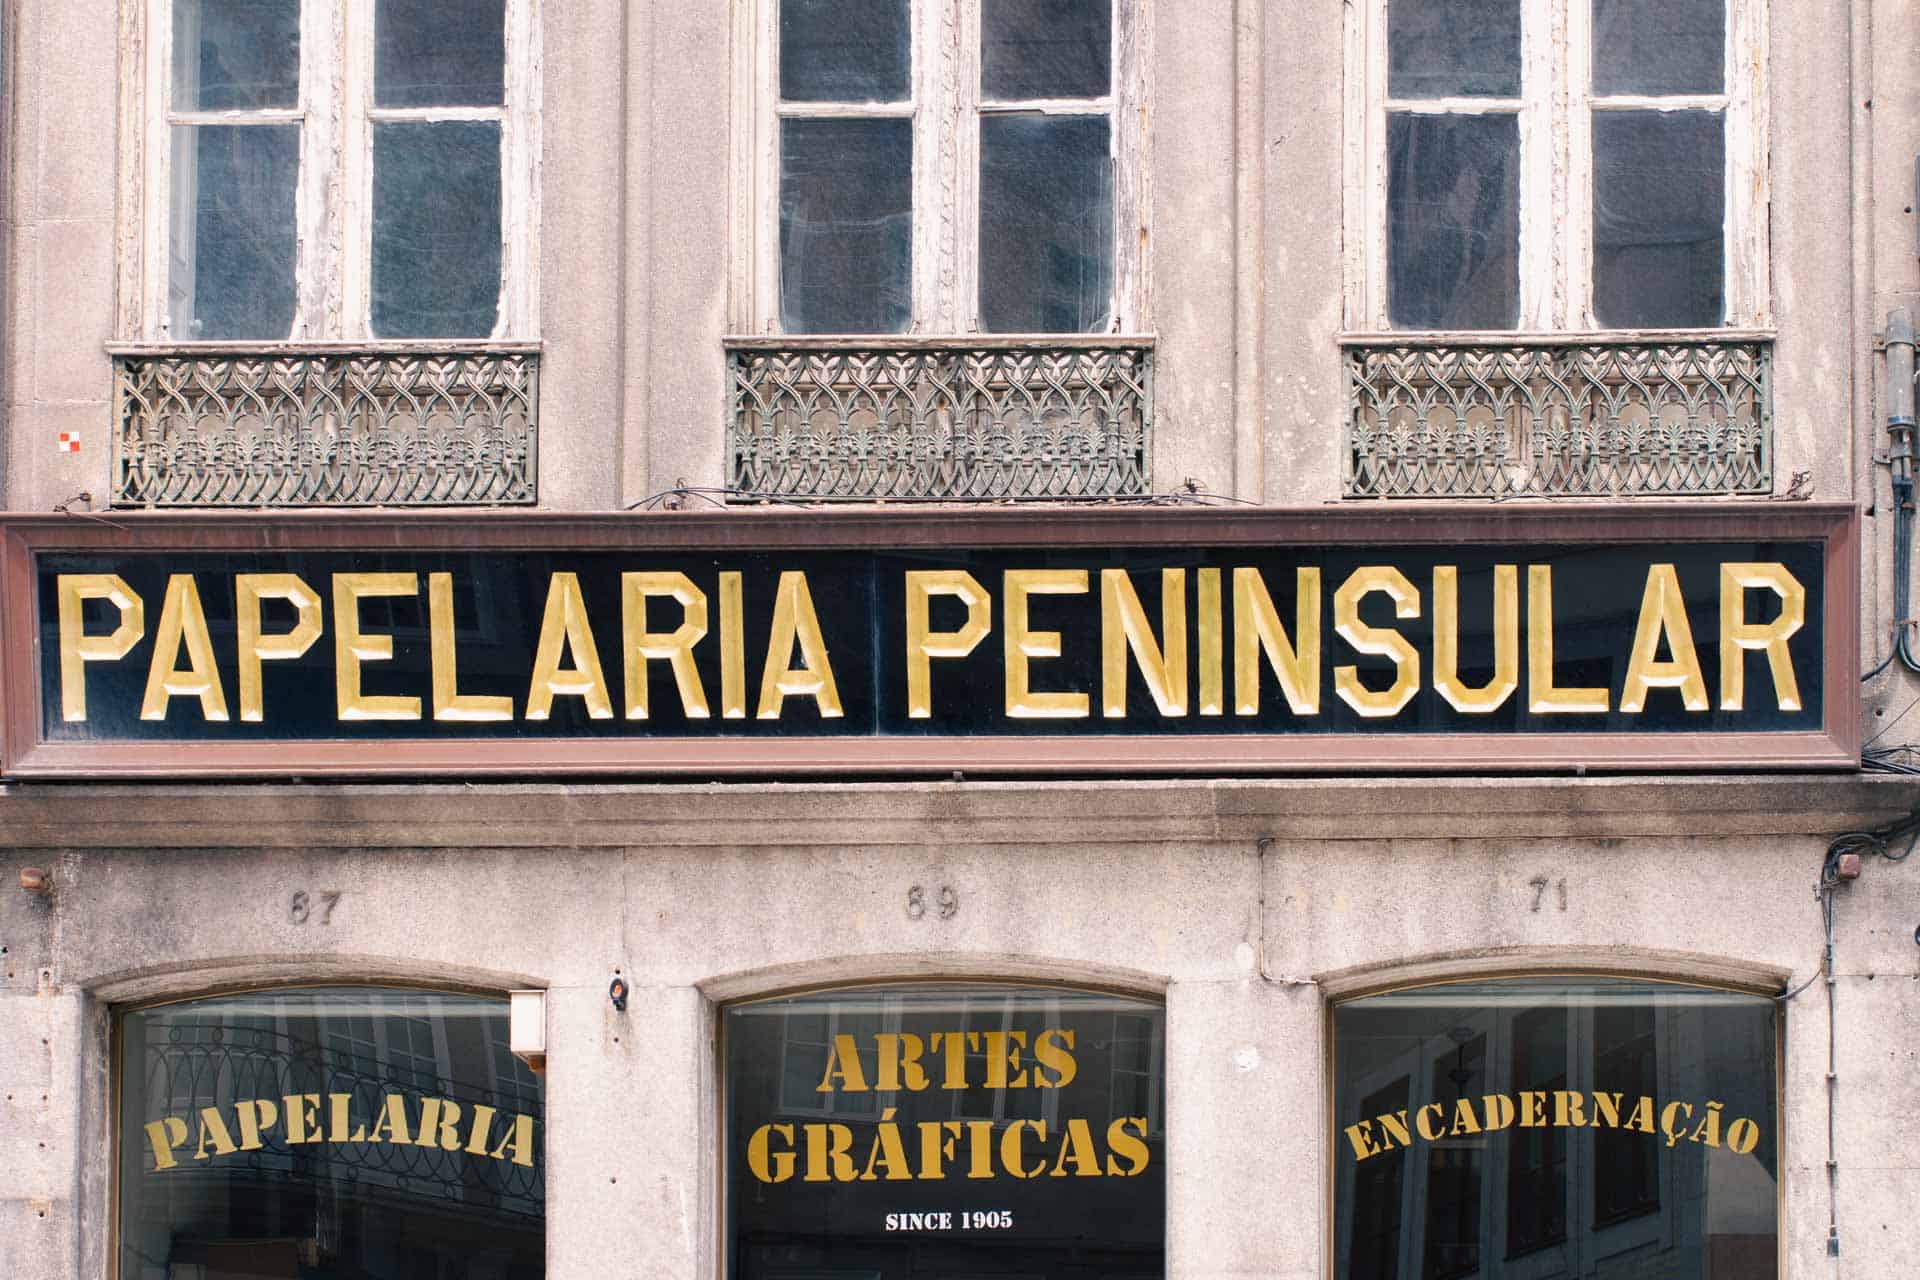 A stationery and arts materials shop in Porto, Portugal, with a beautiful shop sign in old style typography.